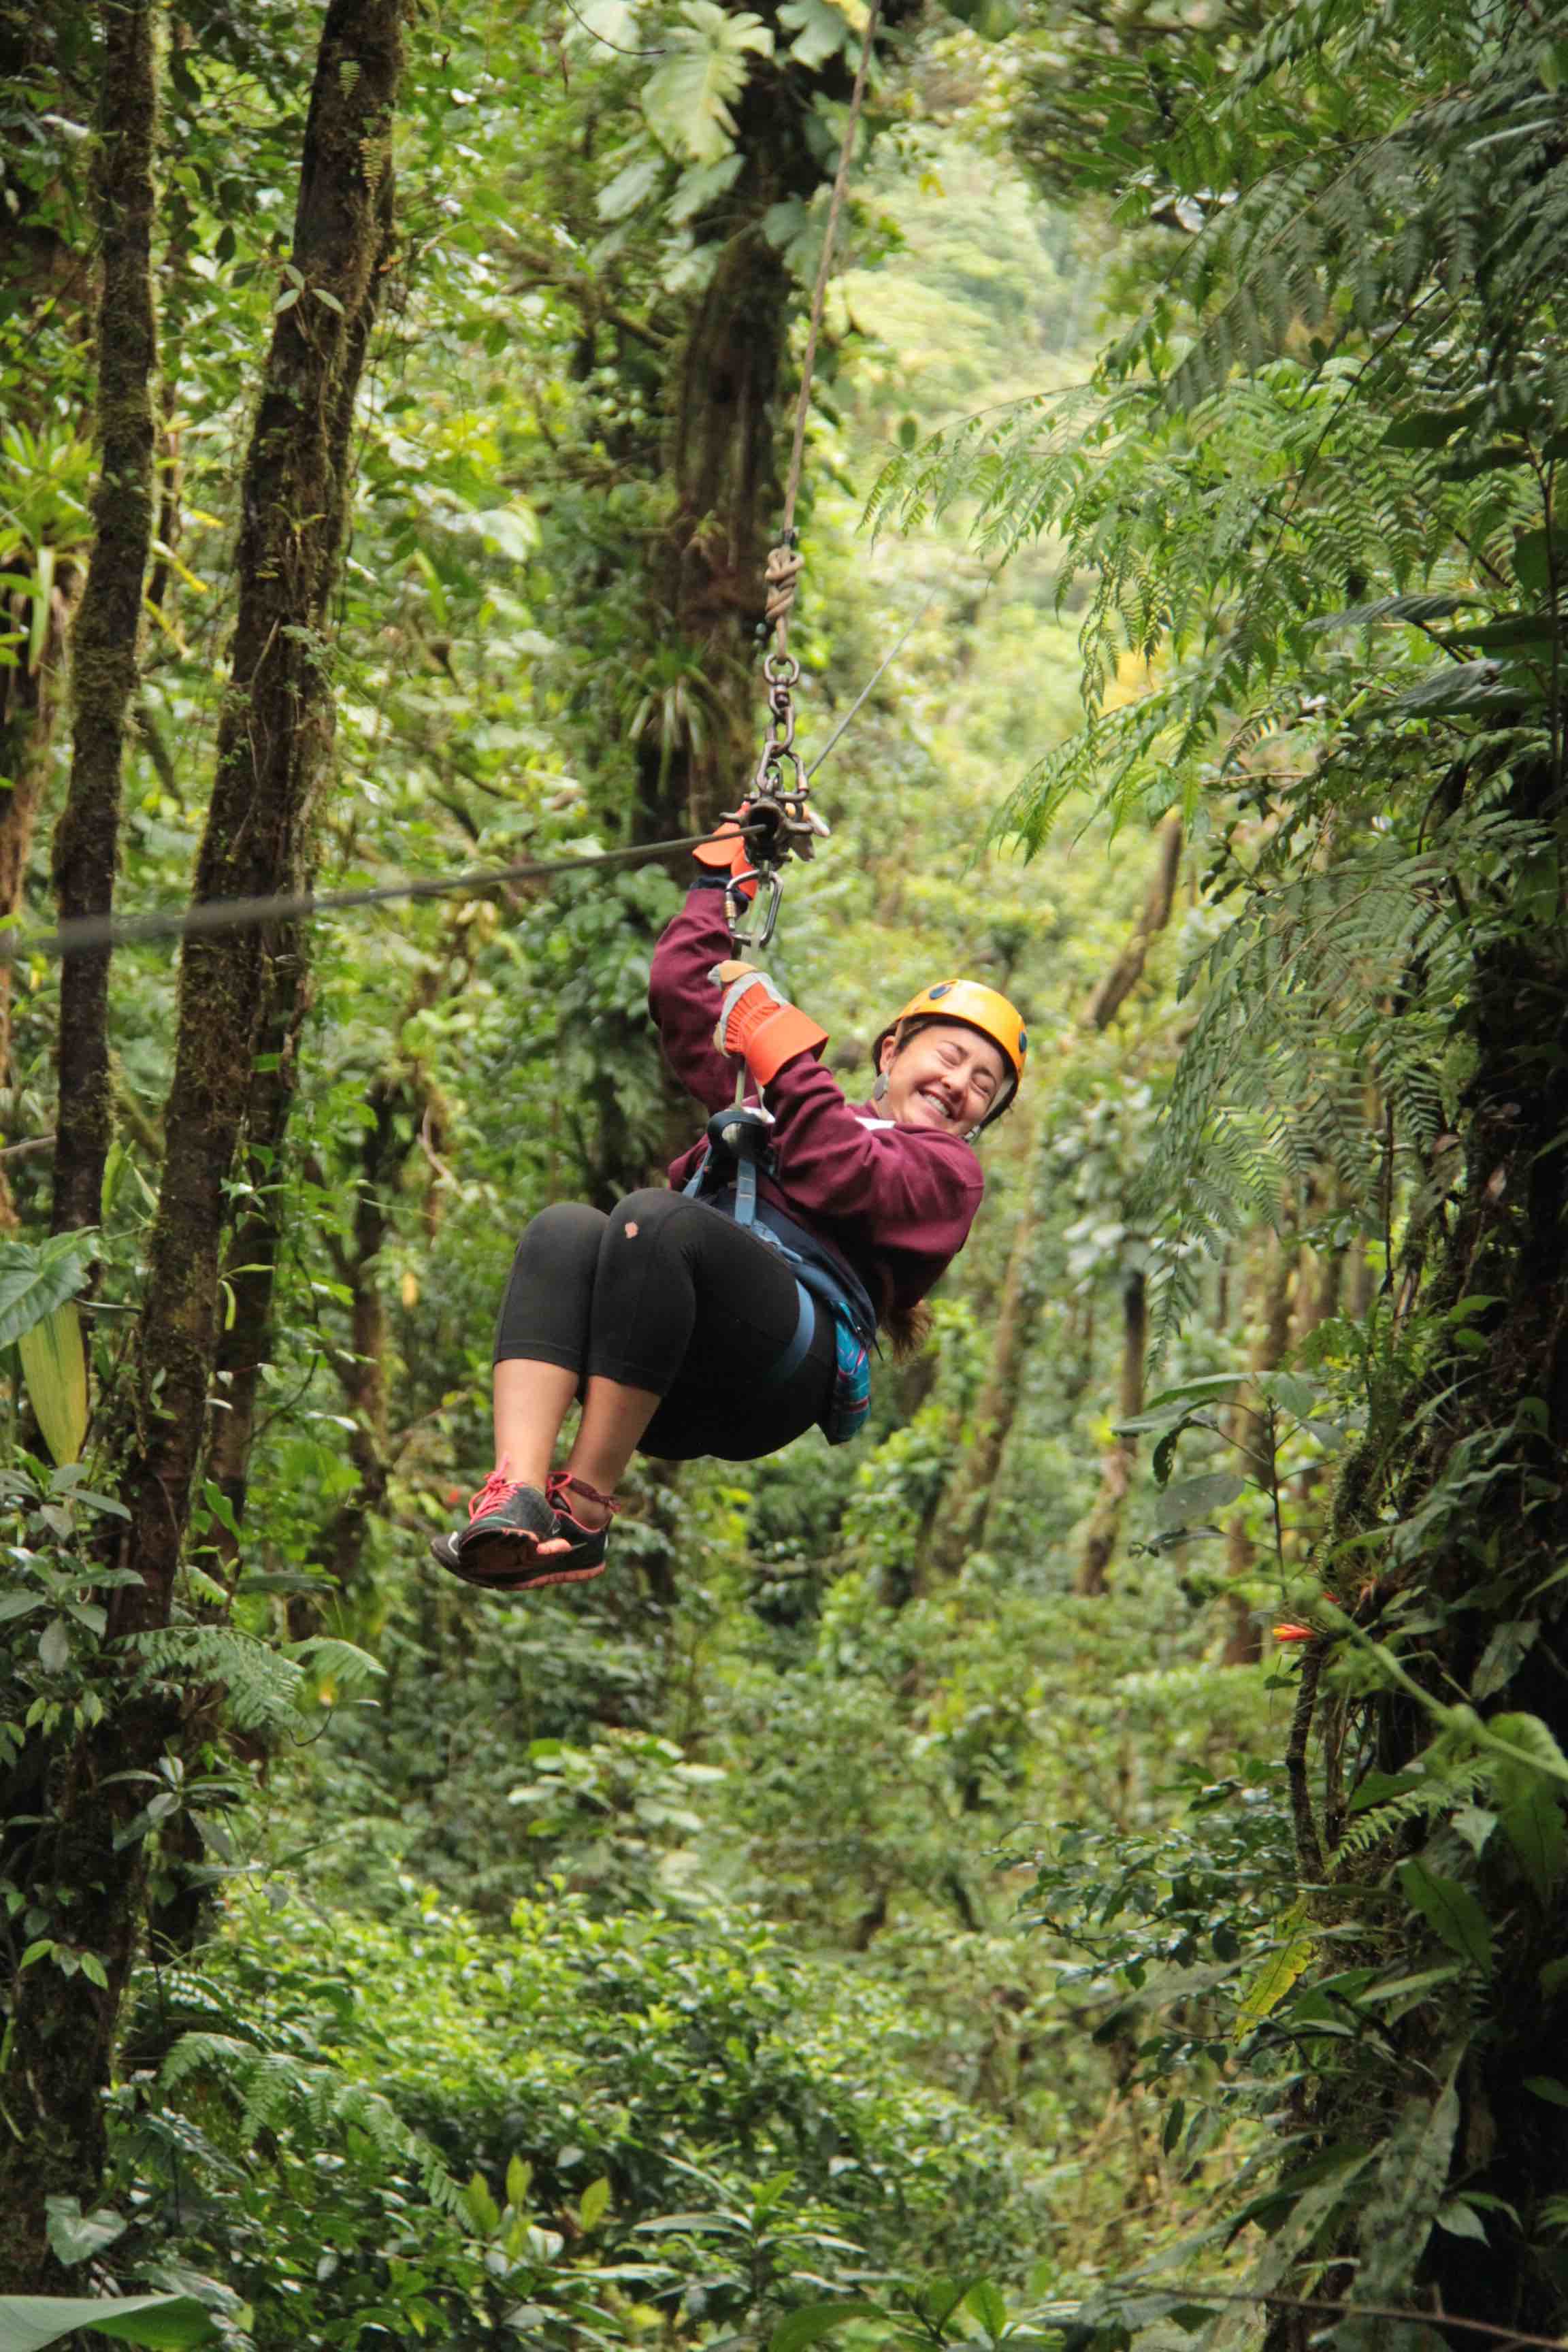 A student ziplining in the Monteverde Cloud Forest in Costa Rica